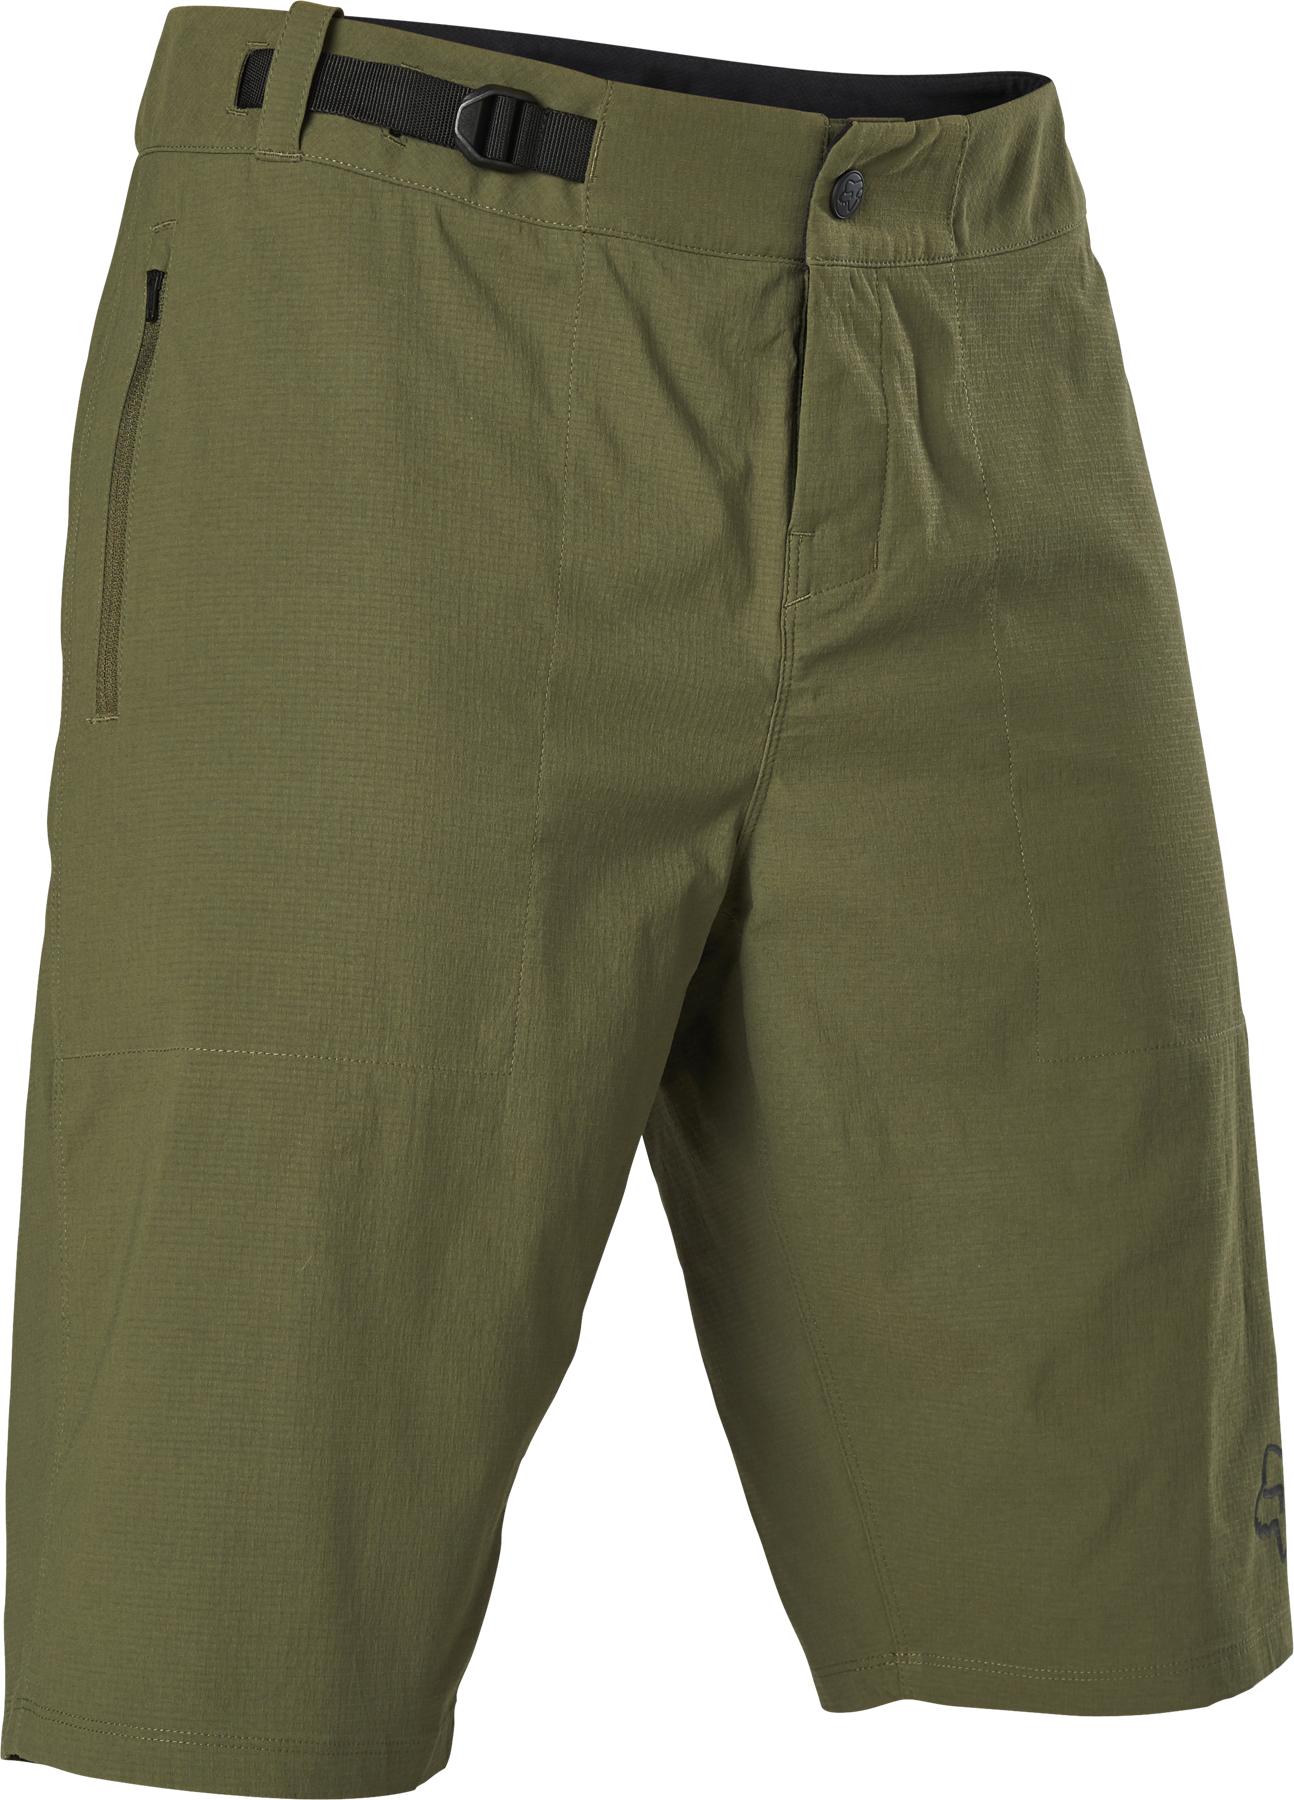 Fox Racing Ranger Short With Liner  Olive Green